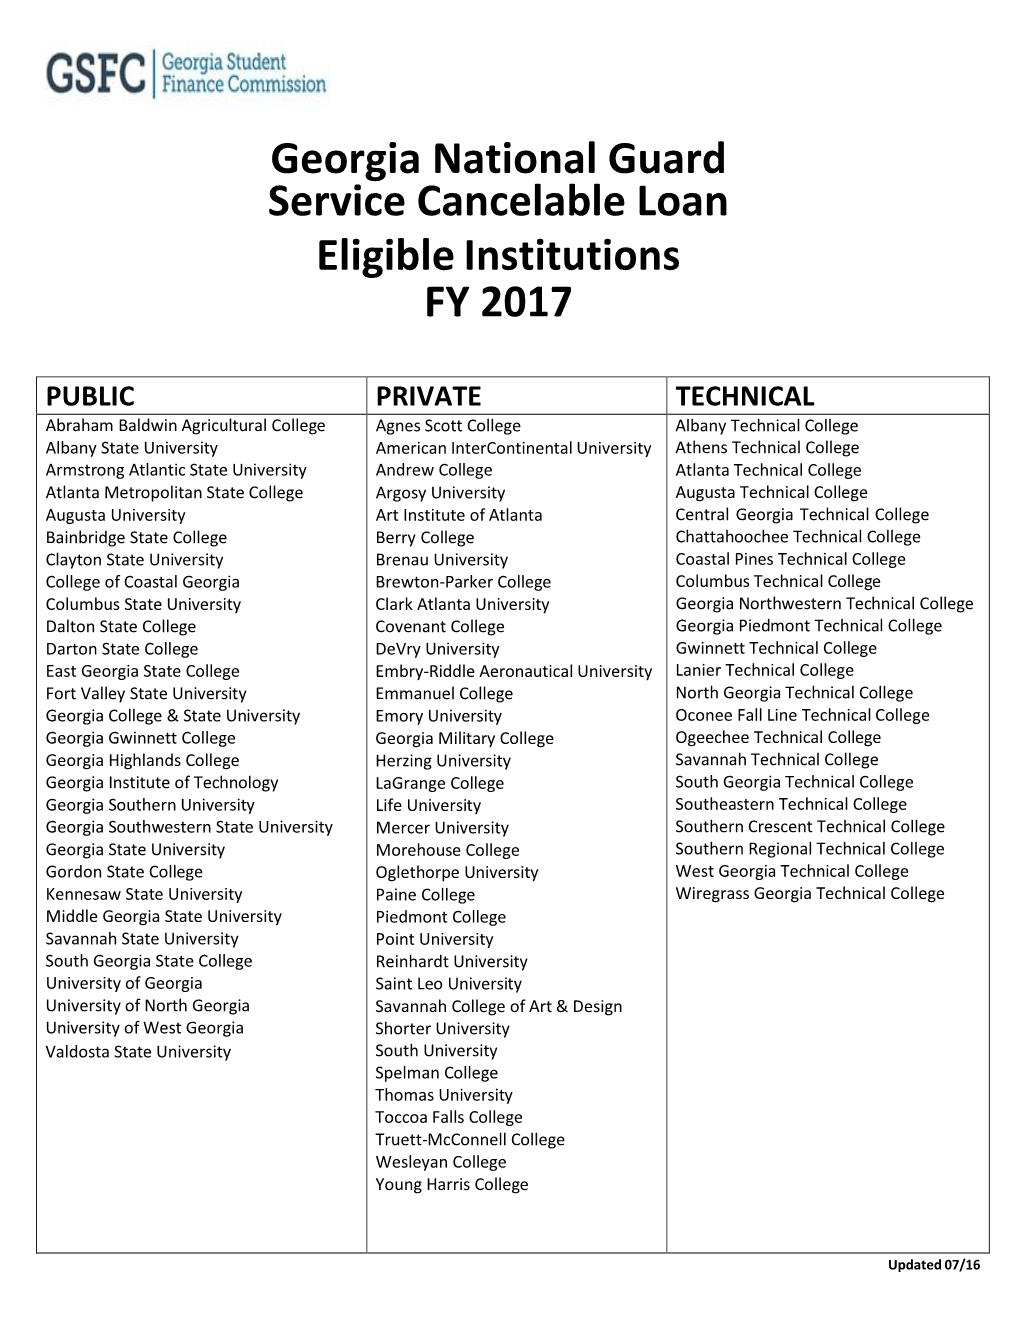 Georgia National Guard Service Cancelable Loan Eligible Institutions FY 2017